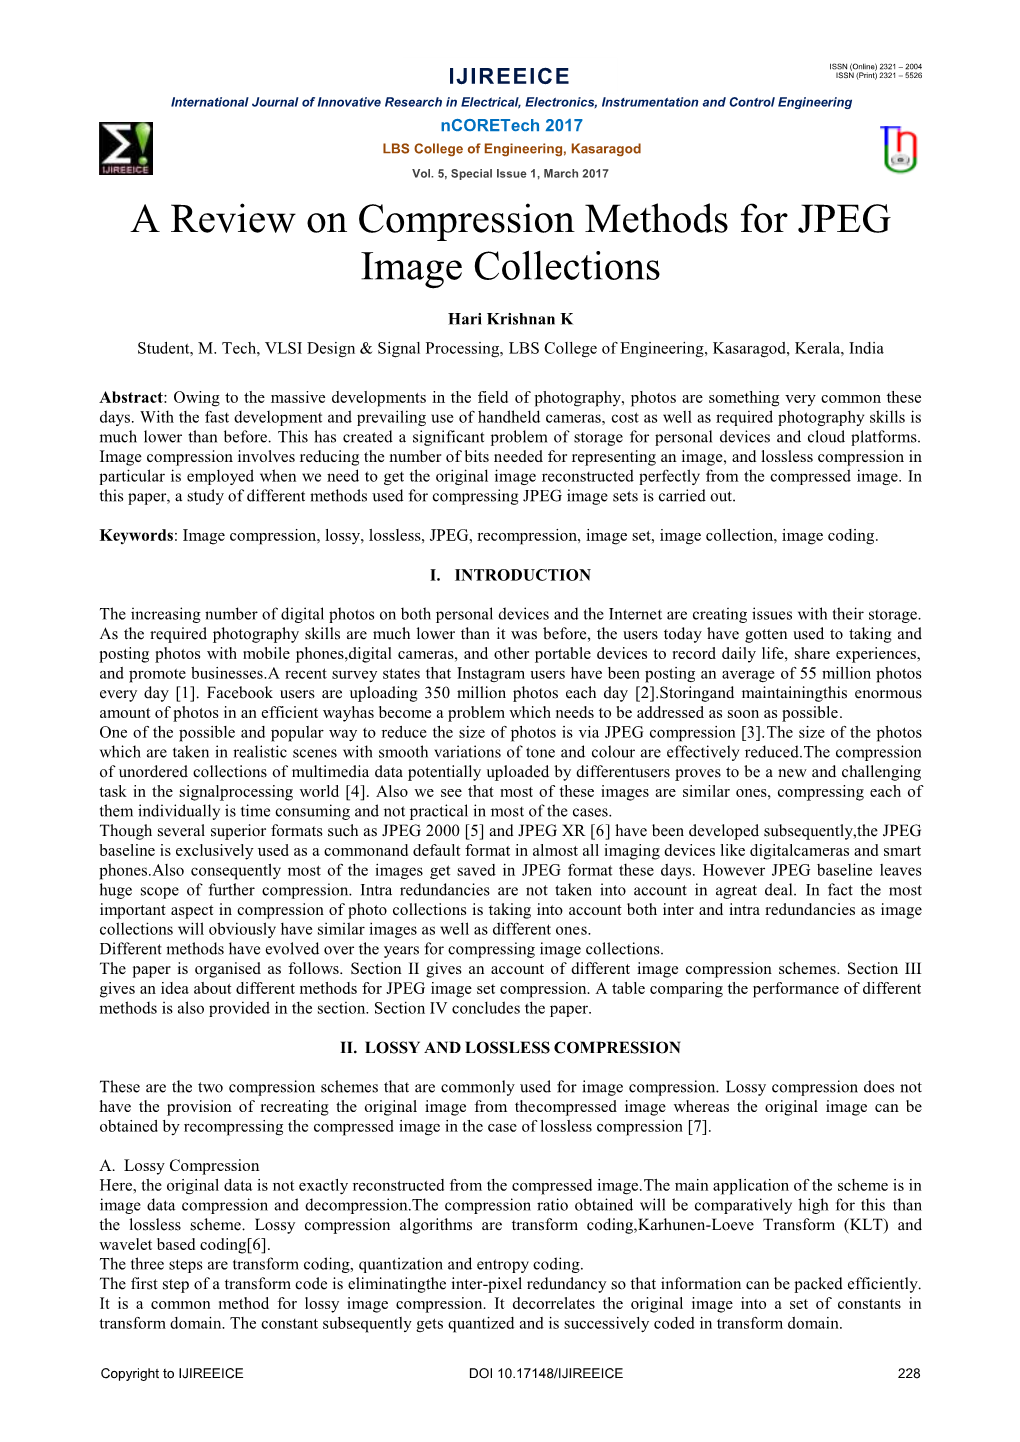 A Review on Compression Methods for JPEG Image Collections